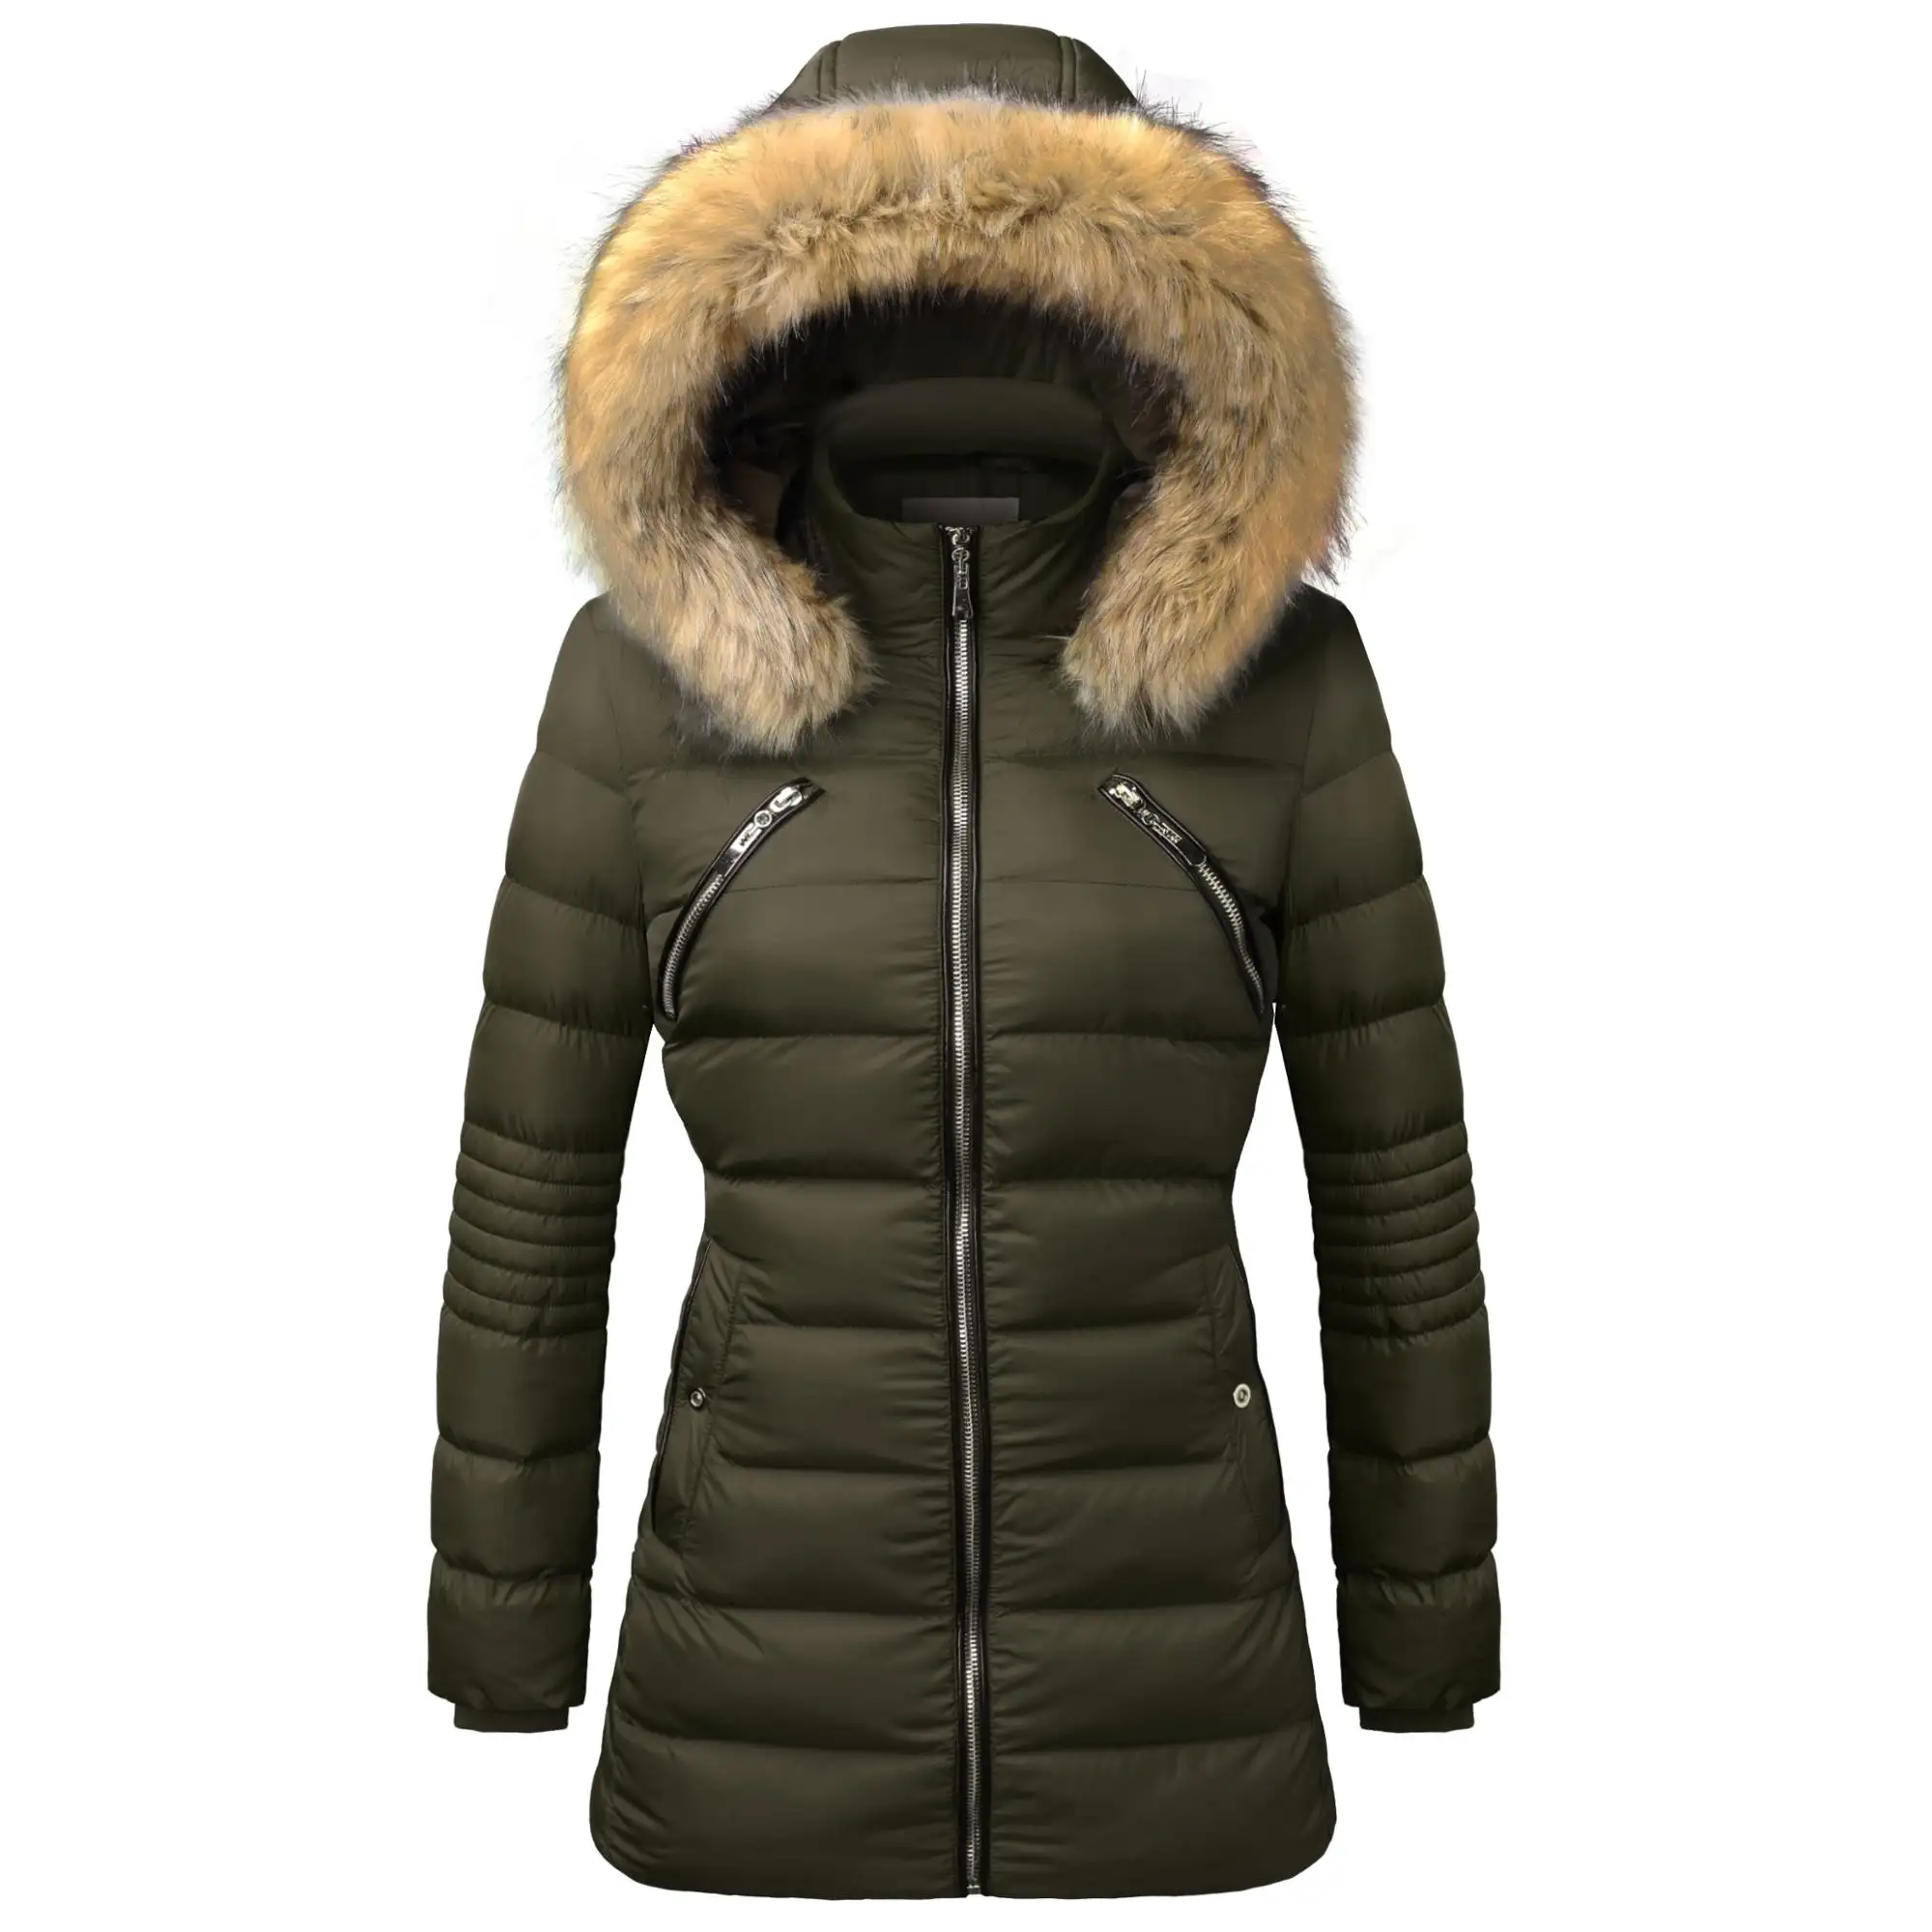 High Quality Women Western Custom Fit Overcoat Fashion Padded Jacket With Fur Hood for Winter